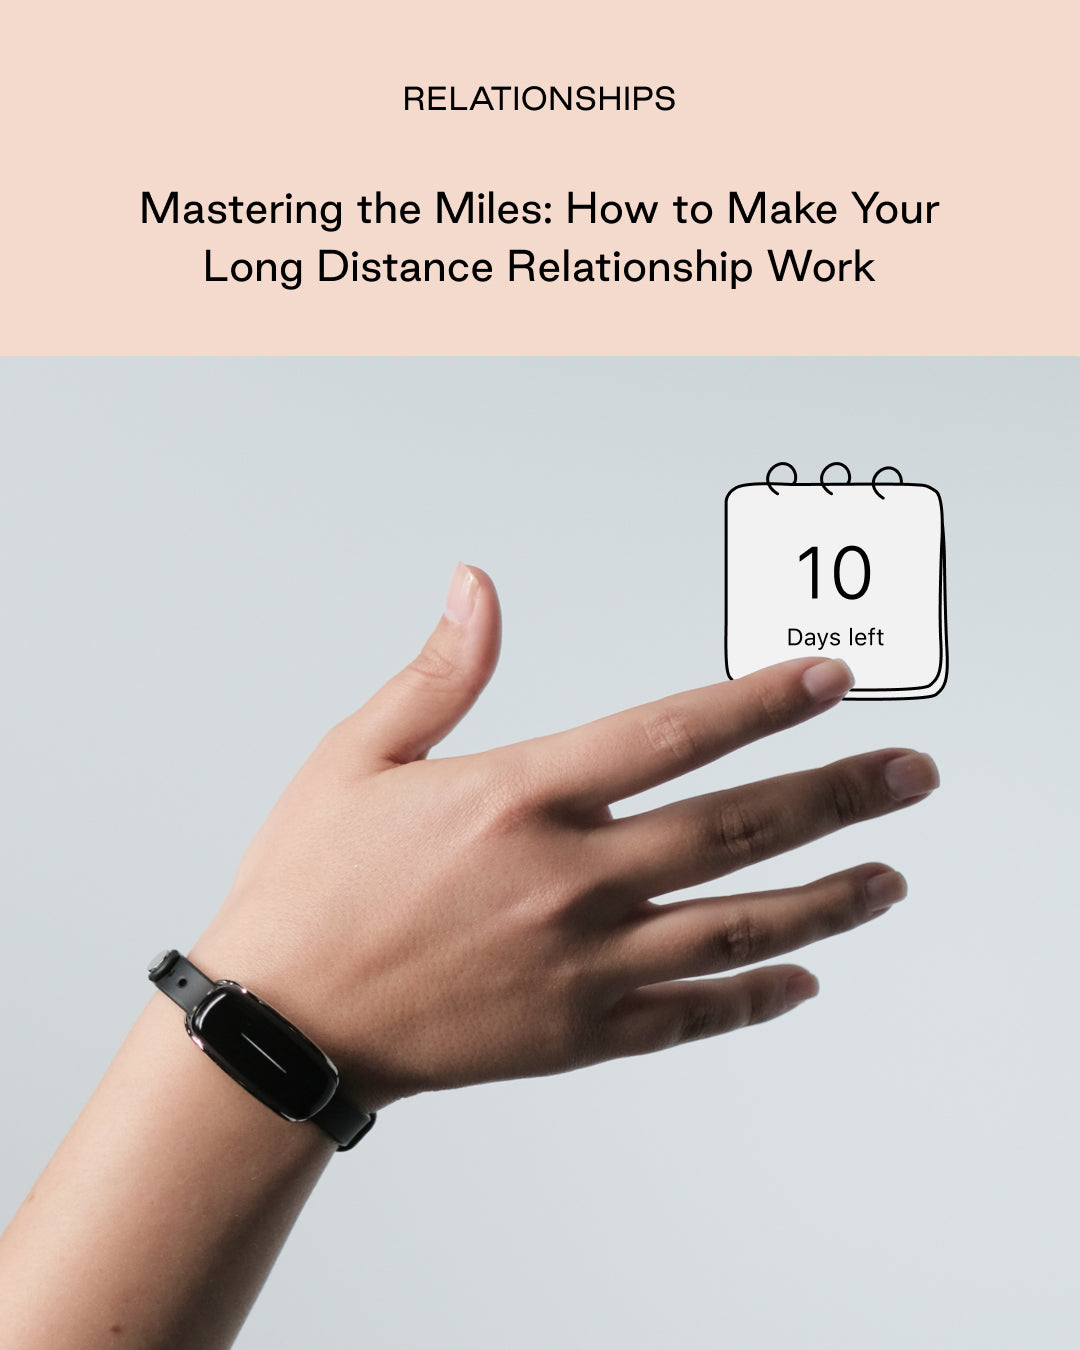 Mastering the Miles: How to Make Your Long Distance Relationship Work